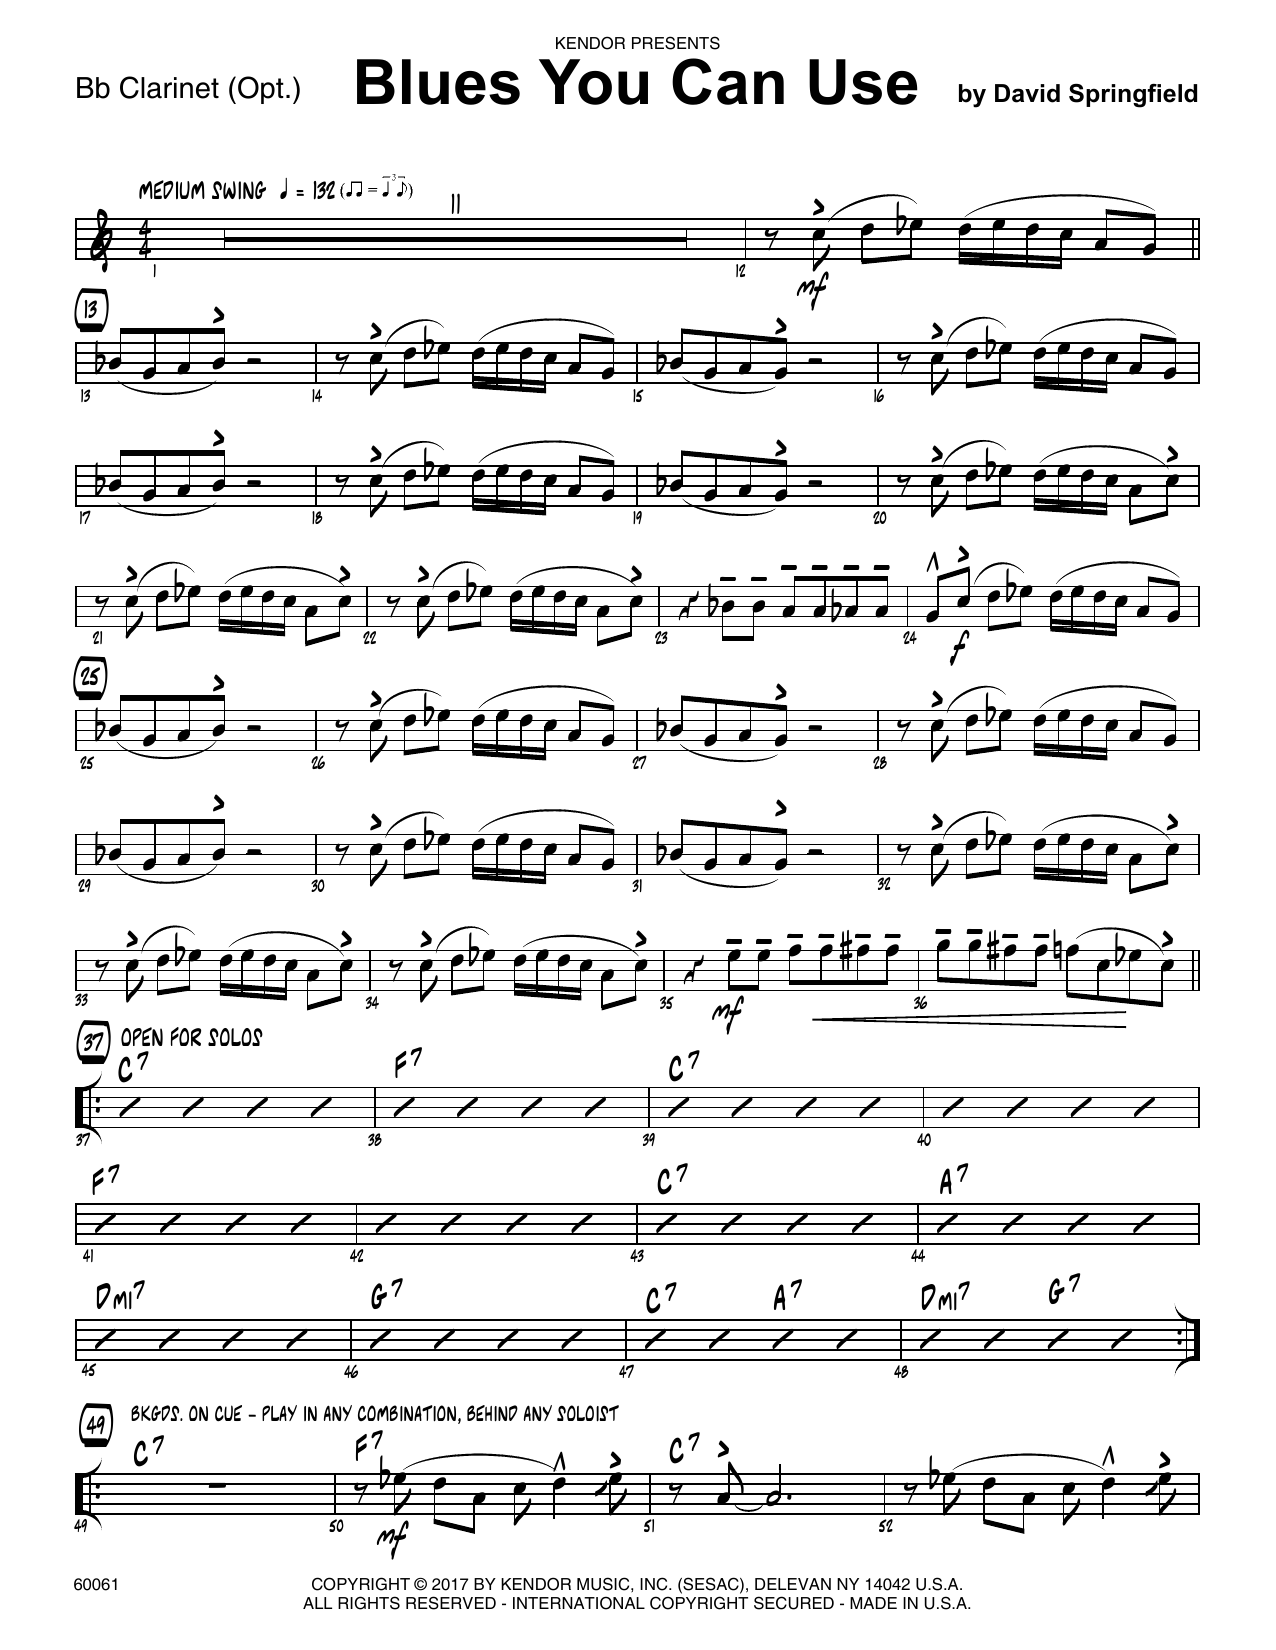 Download David Springfield Blues You Can Use - Bb Clarinet sheet music and printable PDF score & Jazz music notes